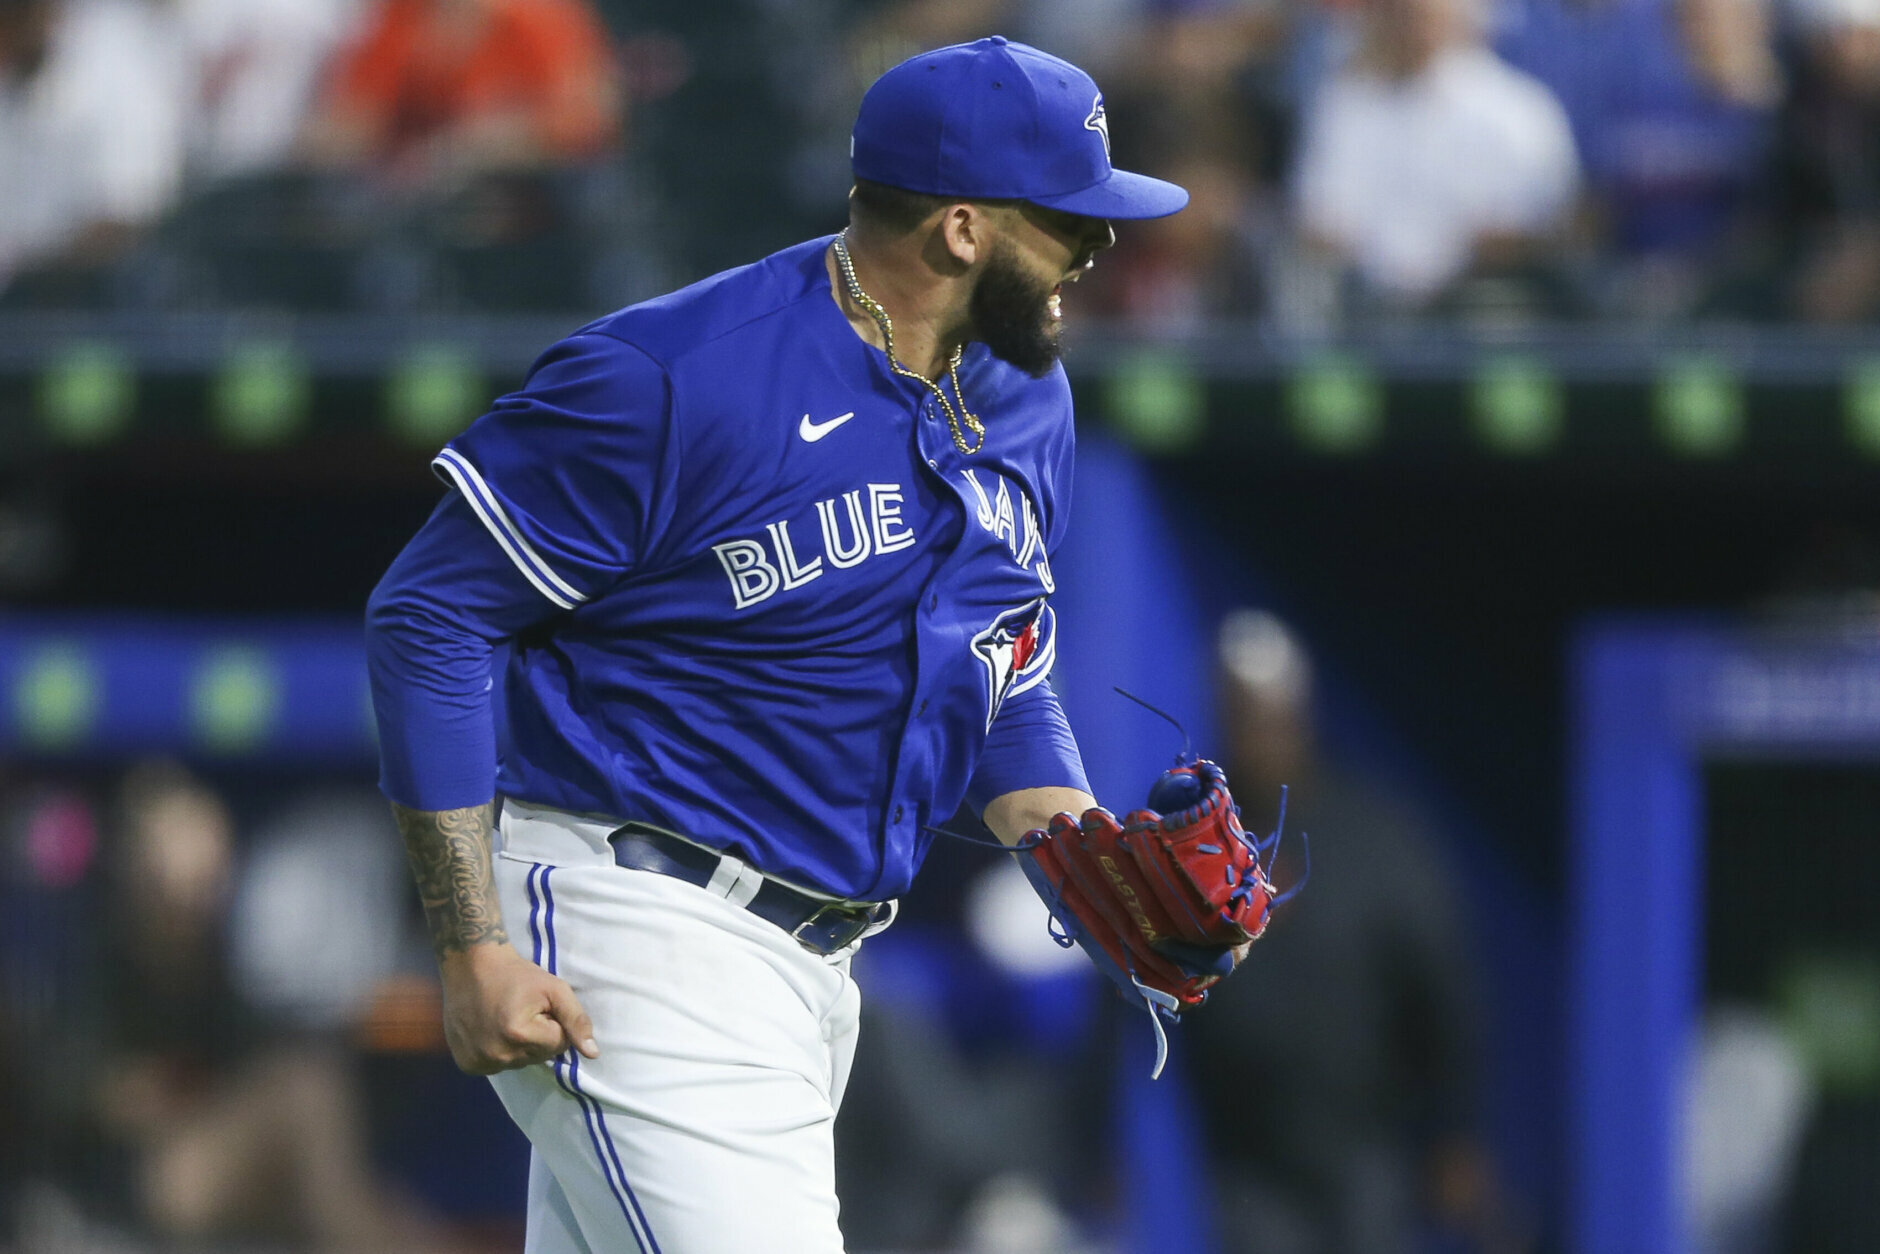 Miscues cost Orioles in loss to Blue Jays